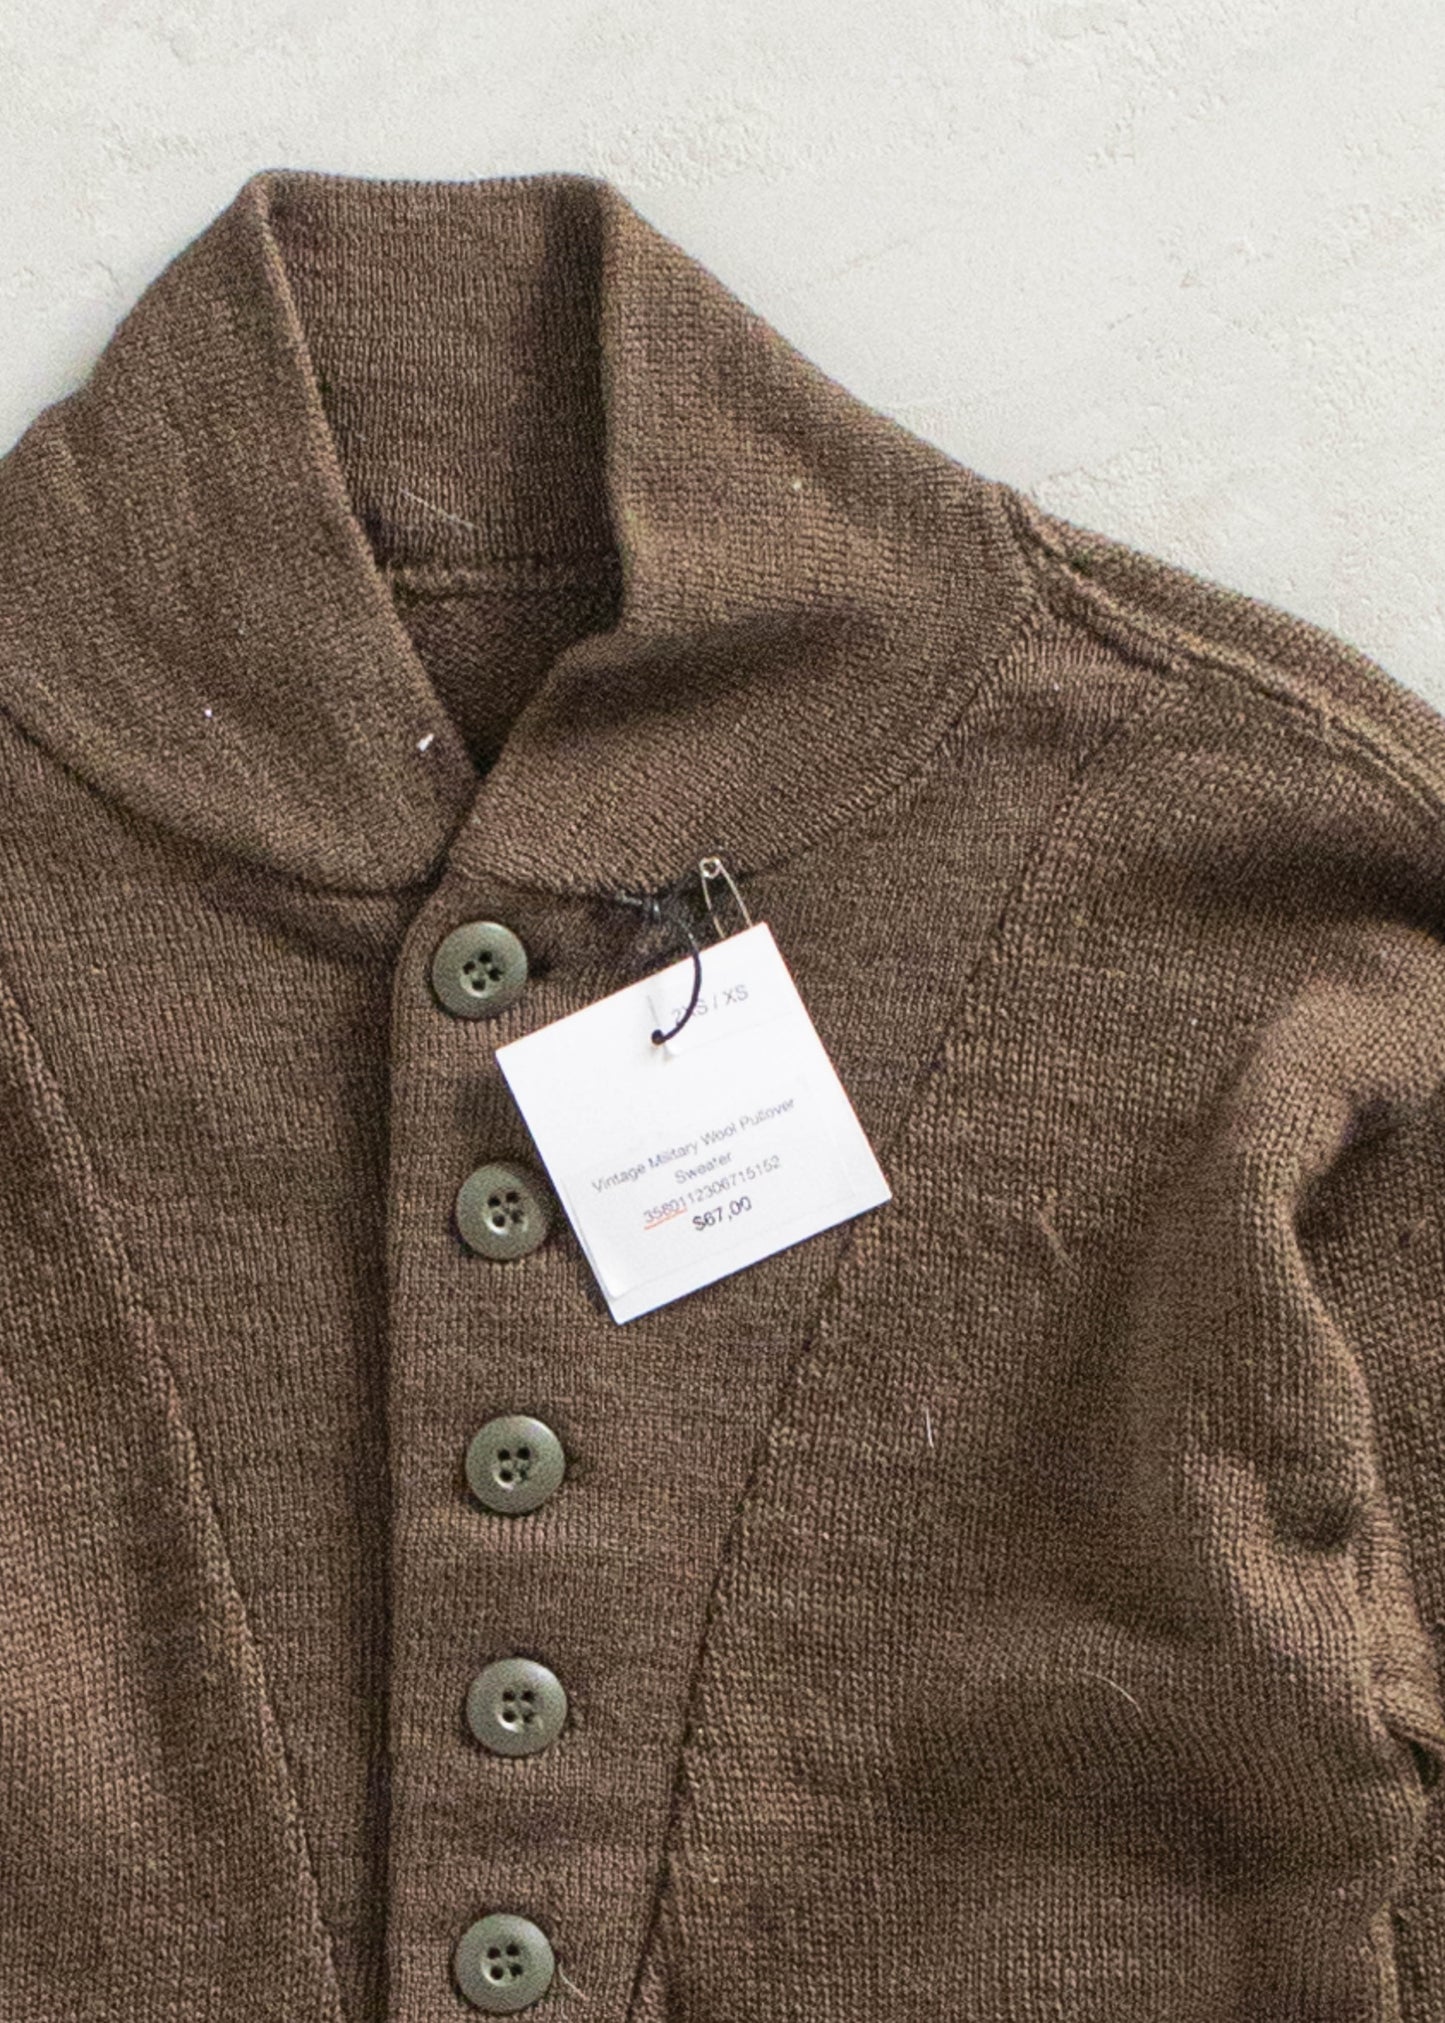 Vintage 1980s Military Issue Wool Pullover Knit Size 2XS/XS